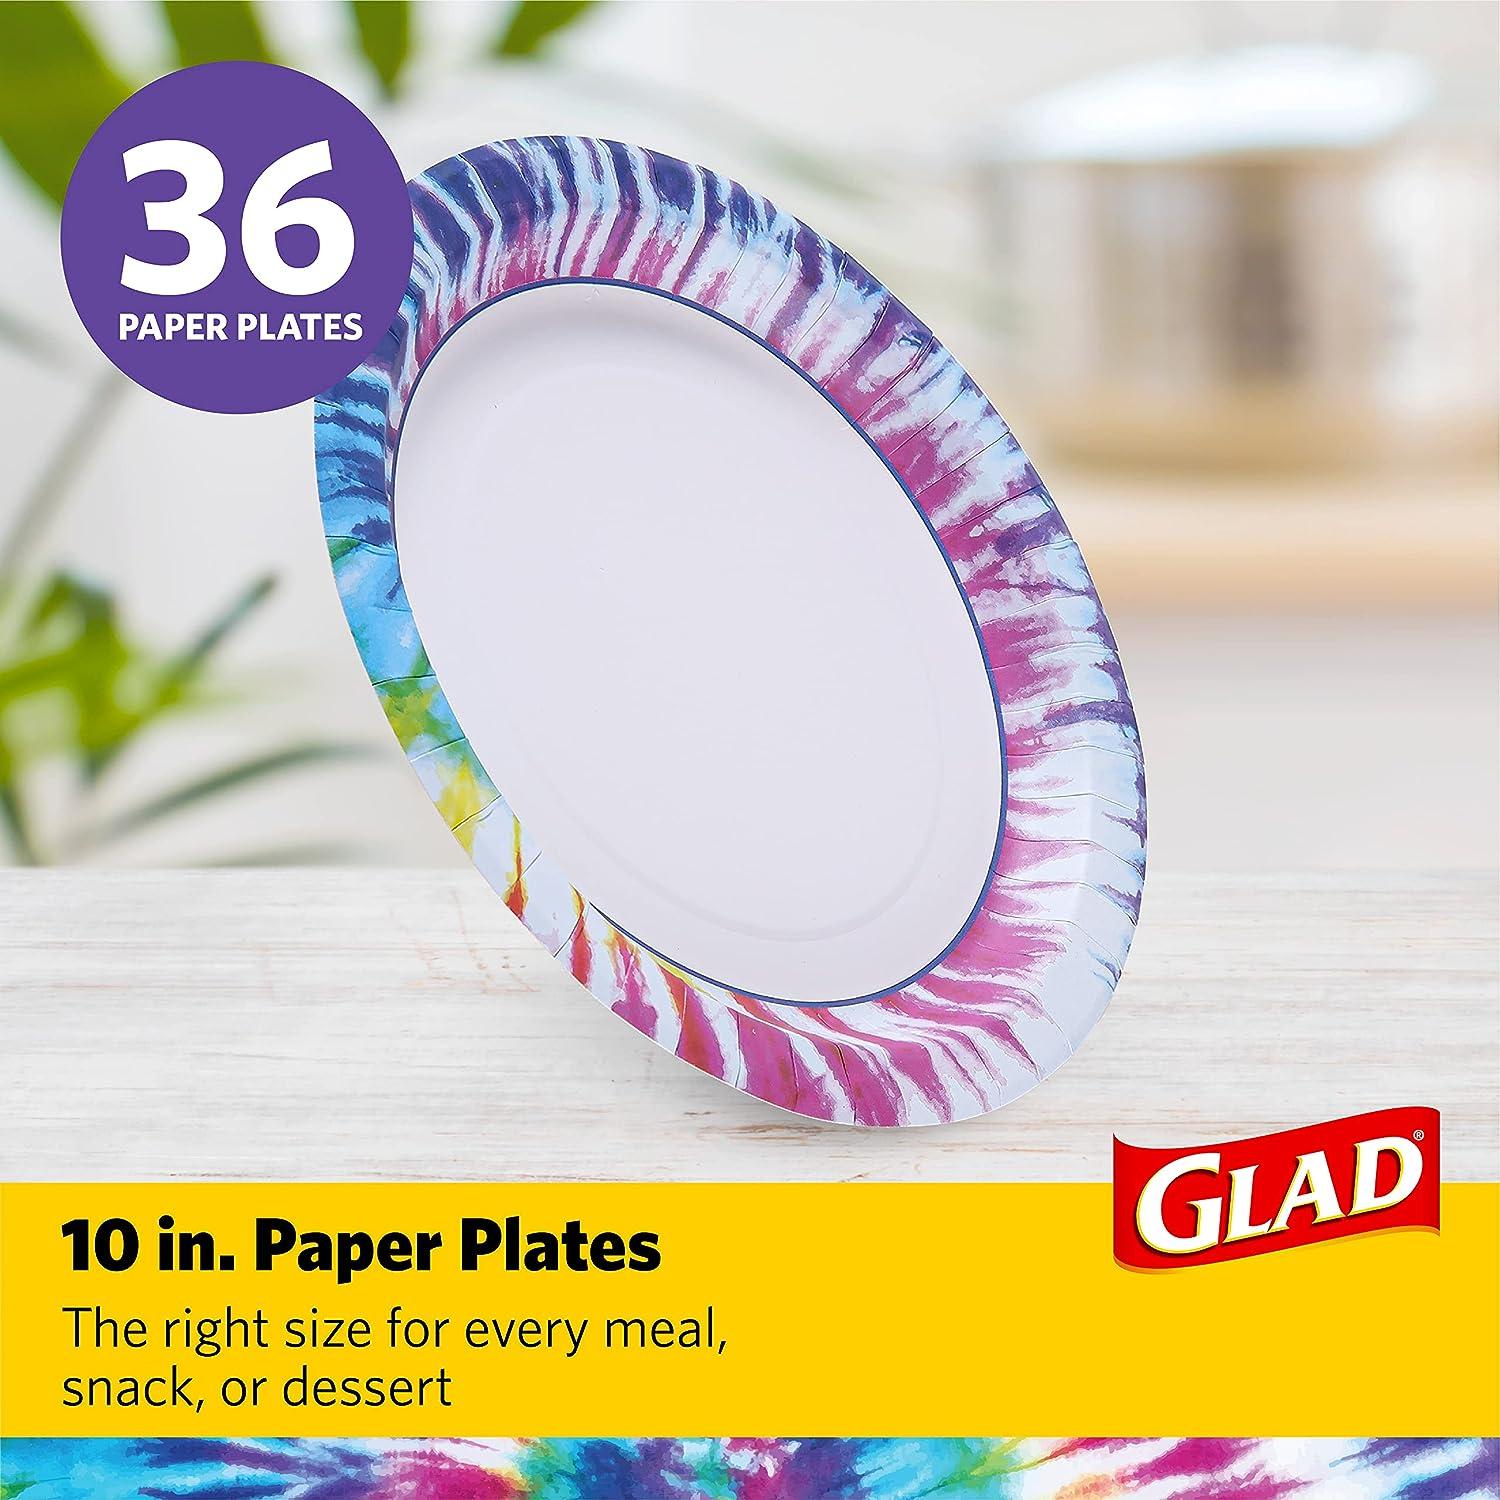 Glad Everyday Round Disposable 10 Paper Plates with Tie Dye Design